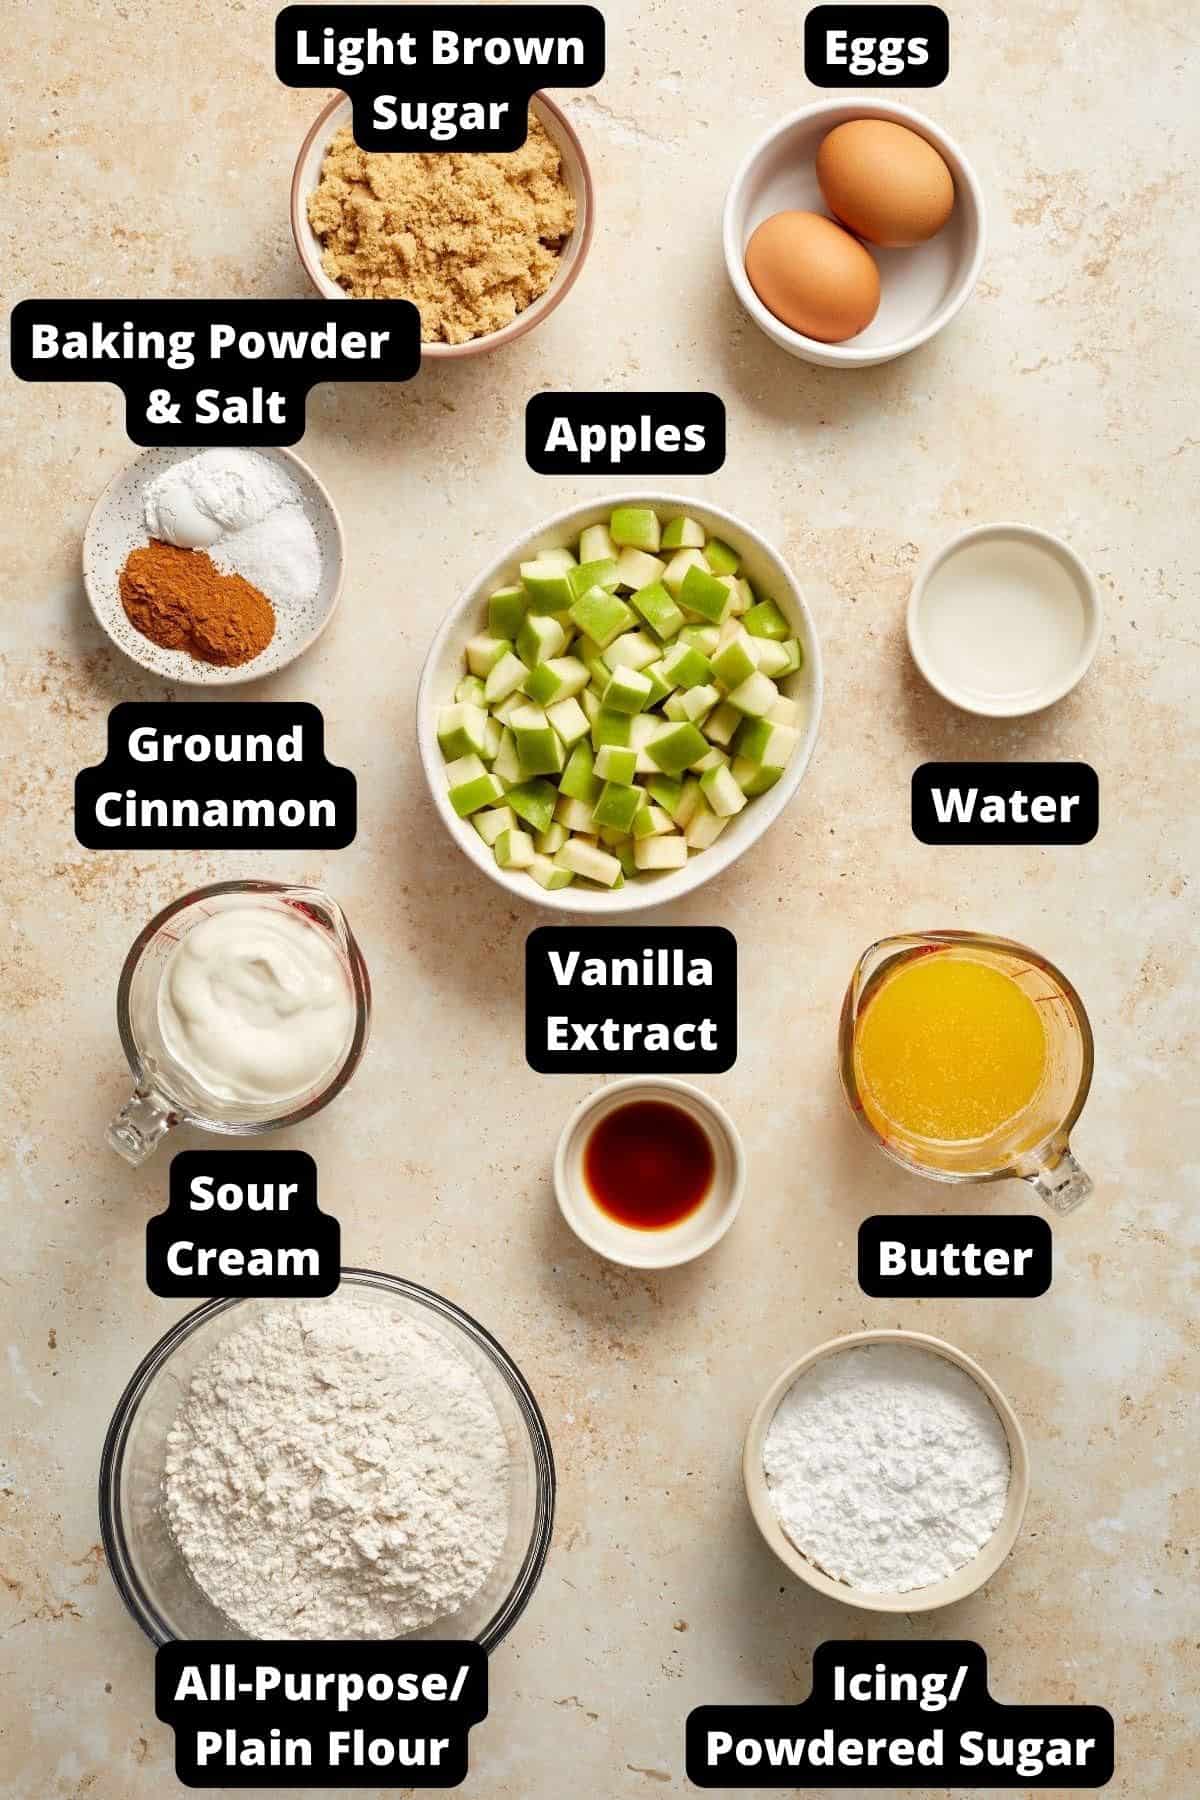 Ingredients in this recipe on a white and beige background.